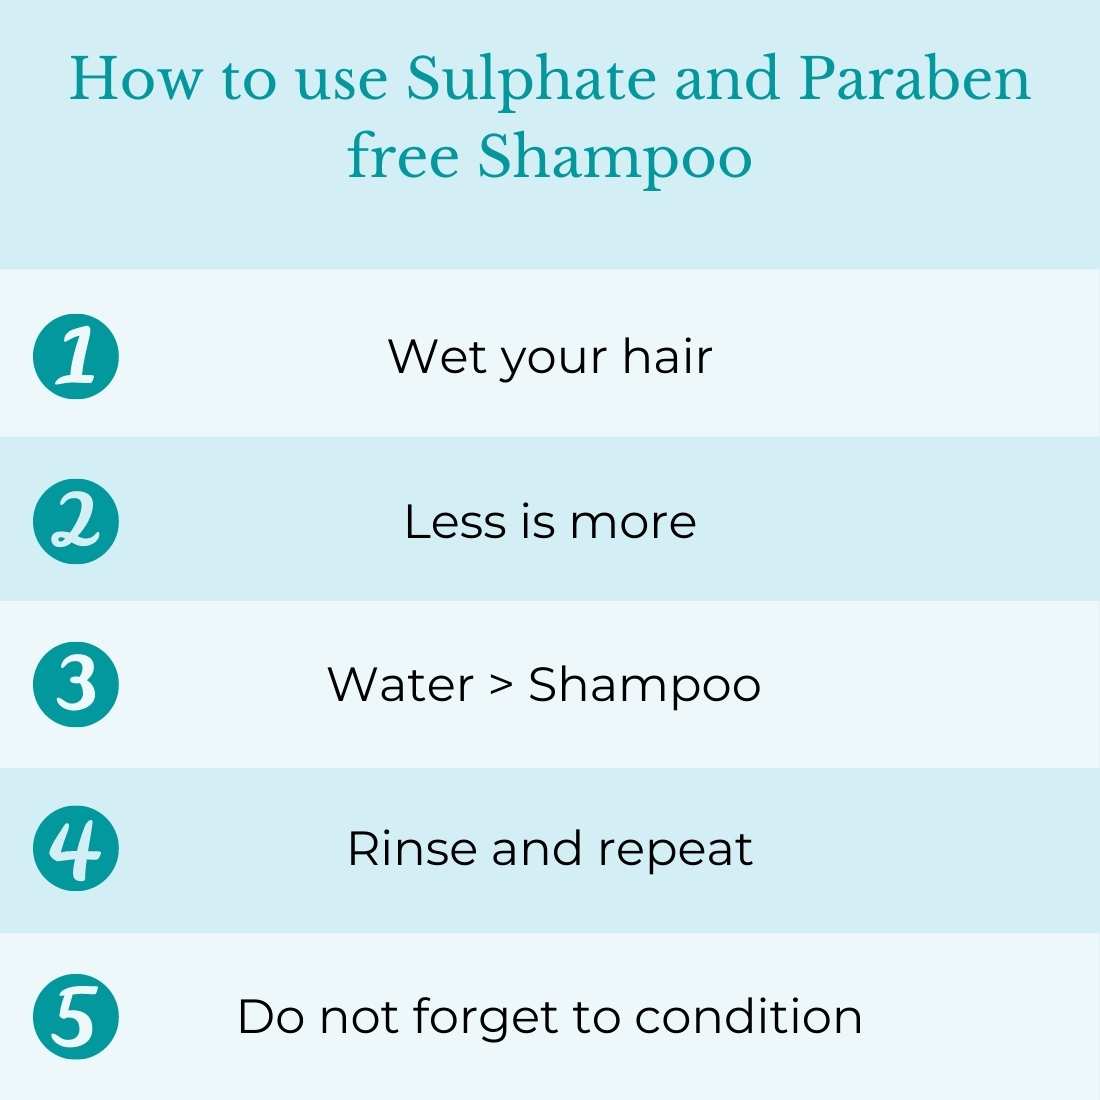 This is an image showing how to use paraben free and sulphate free shampoo.